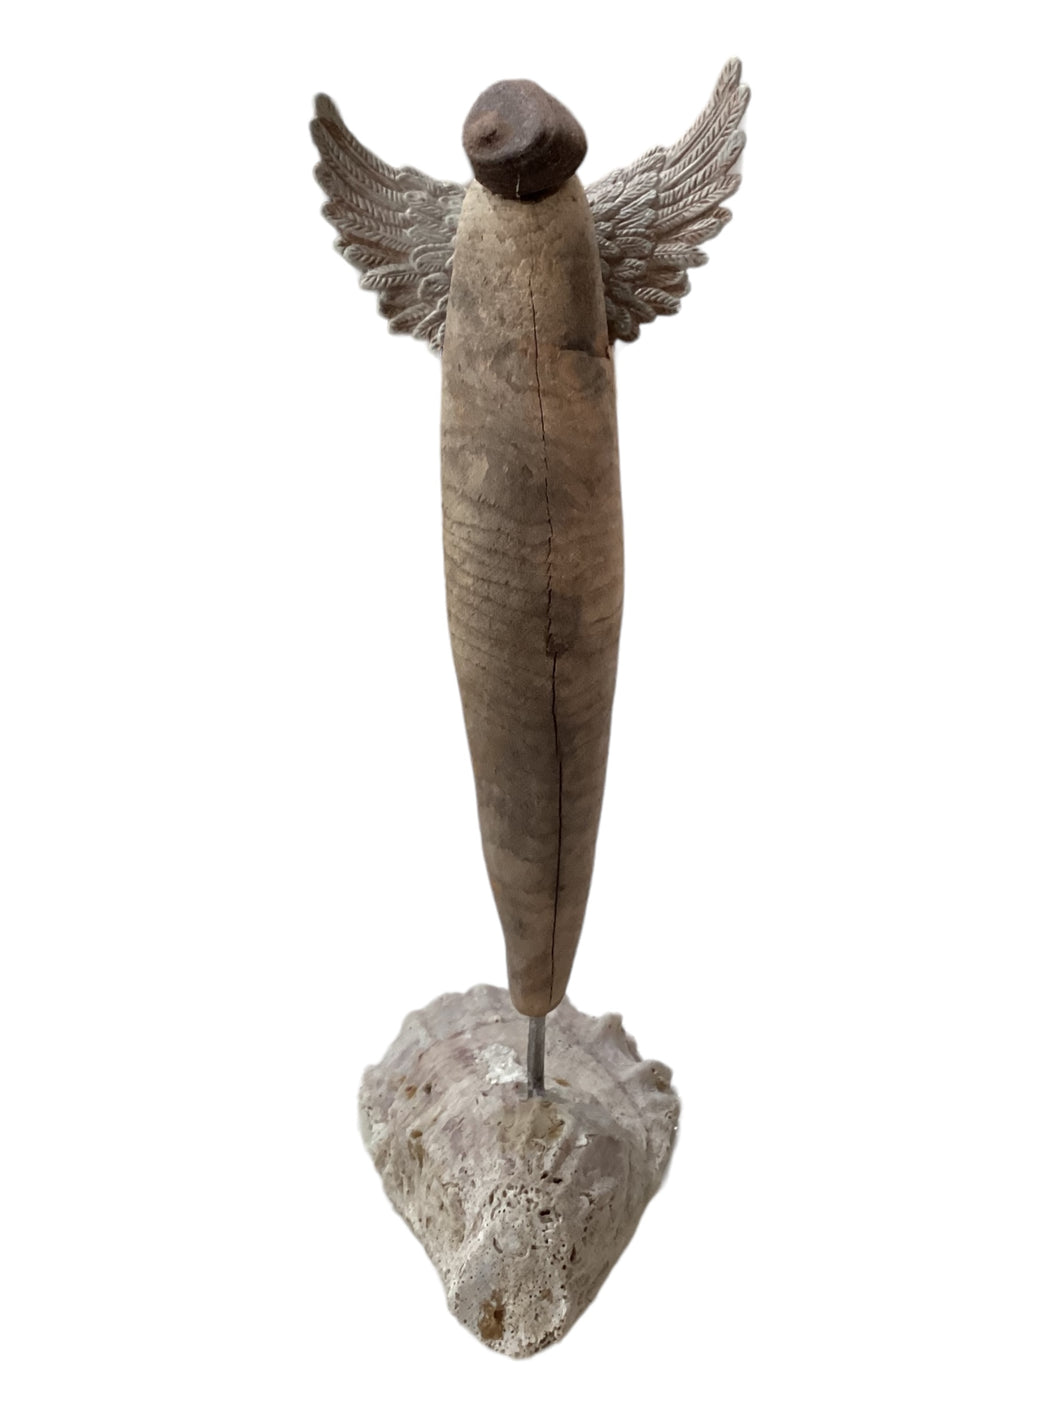 Driftwood Angel Sculpture on Oyster Shell Stand